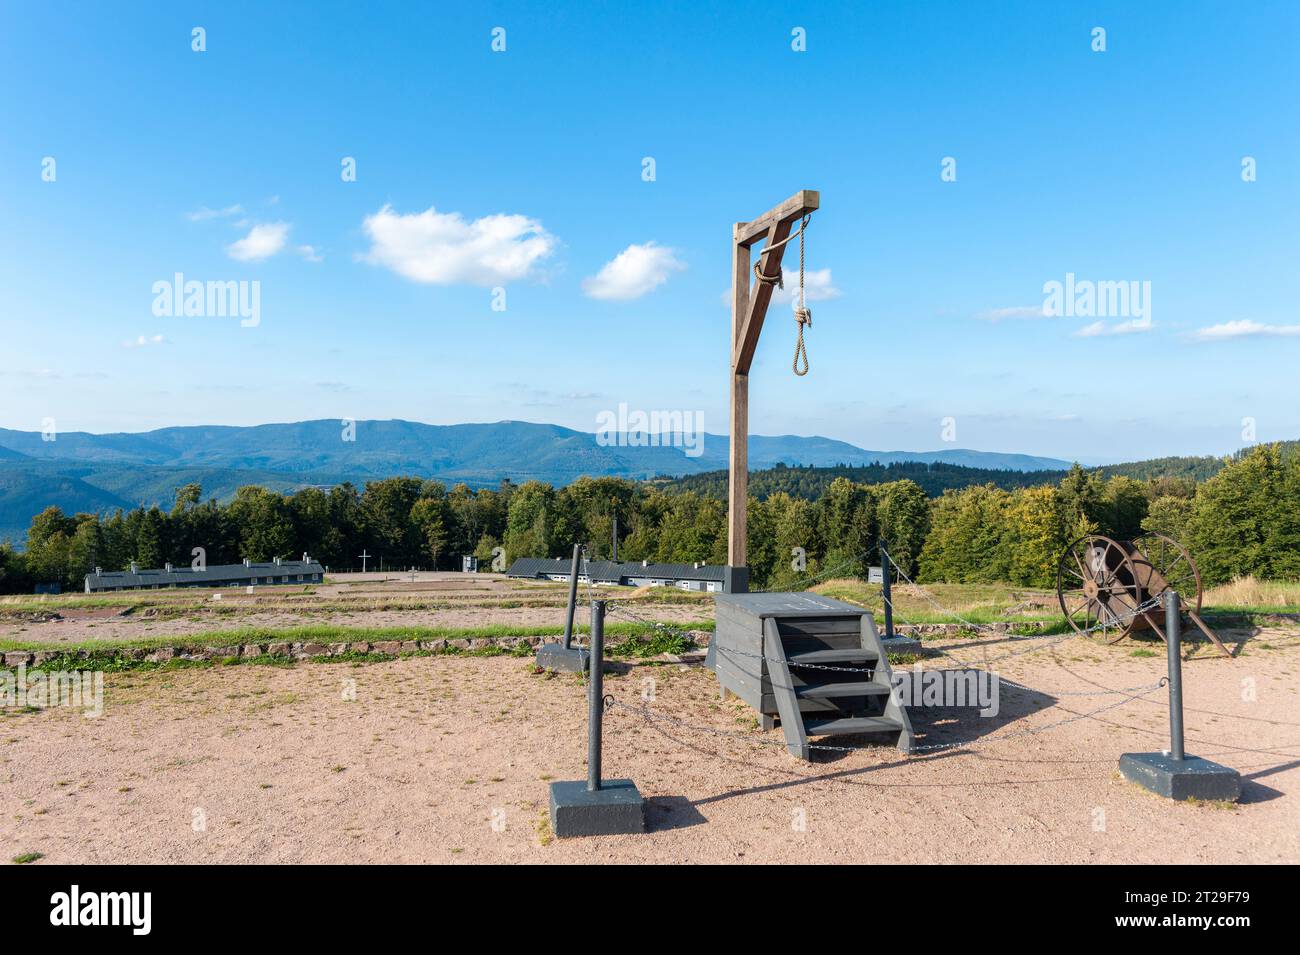 Execution site with gallows in former Natzweiler-Struthof concentration camp, Natzwiller, Alsace, France, Europe Stock Photo